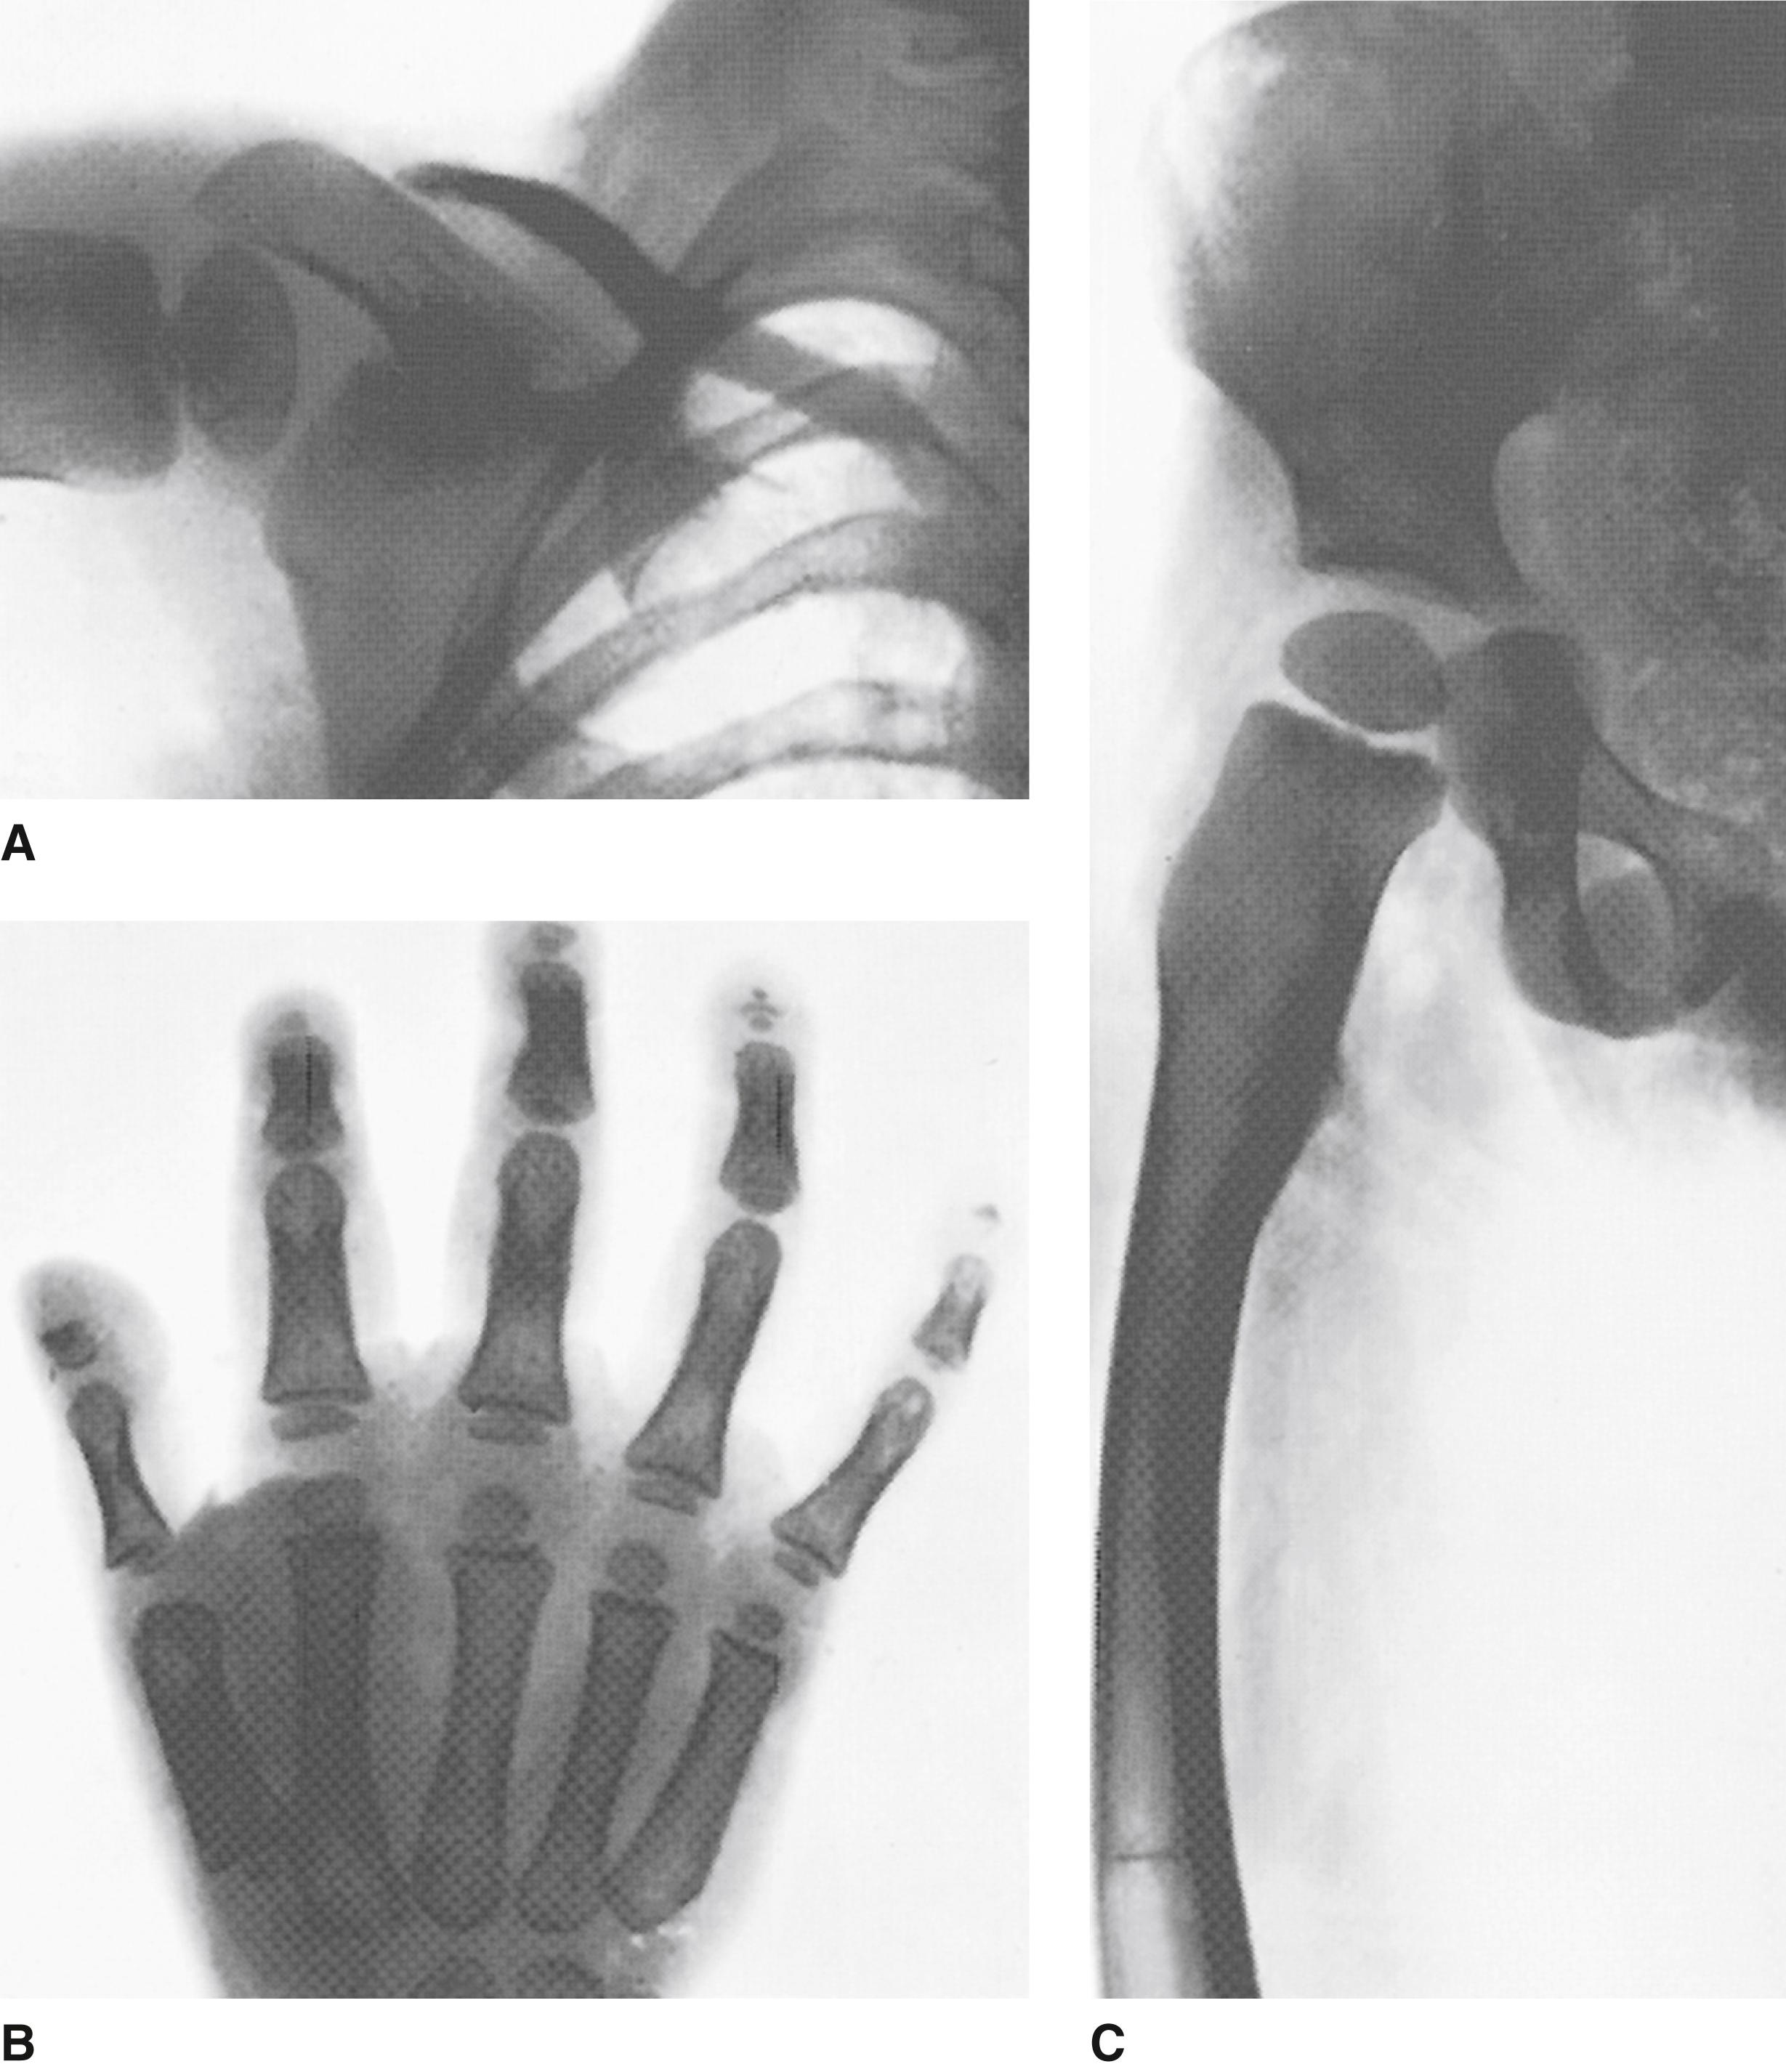 FIGURE 3, A–C, Radiographs of a 3-year-old child show loss of outer clavicle, distal phalanges, and straight femur.